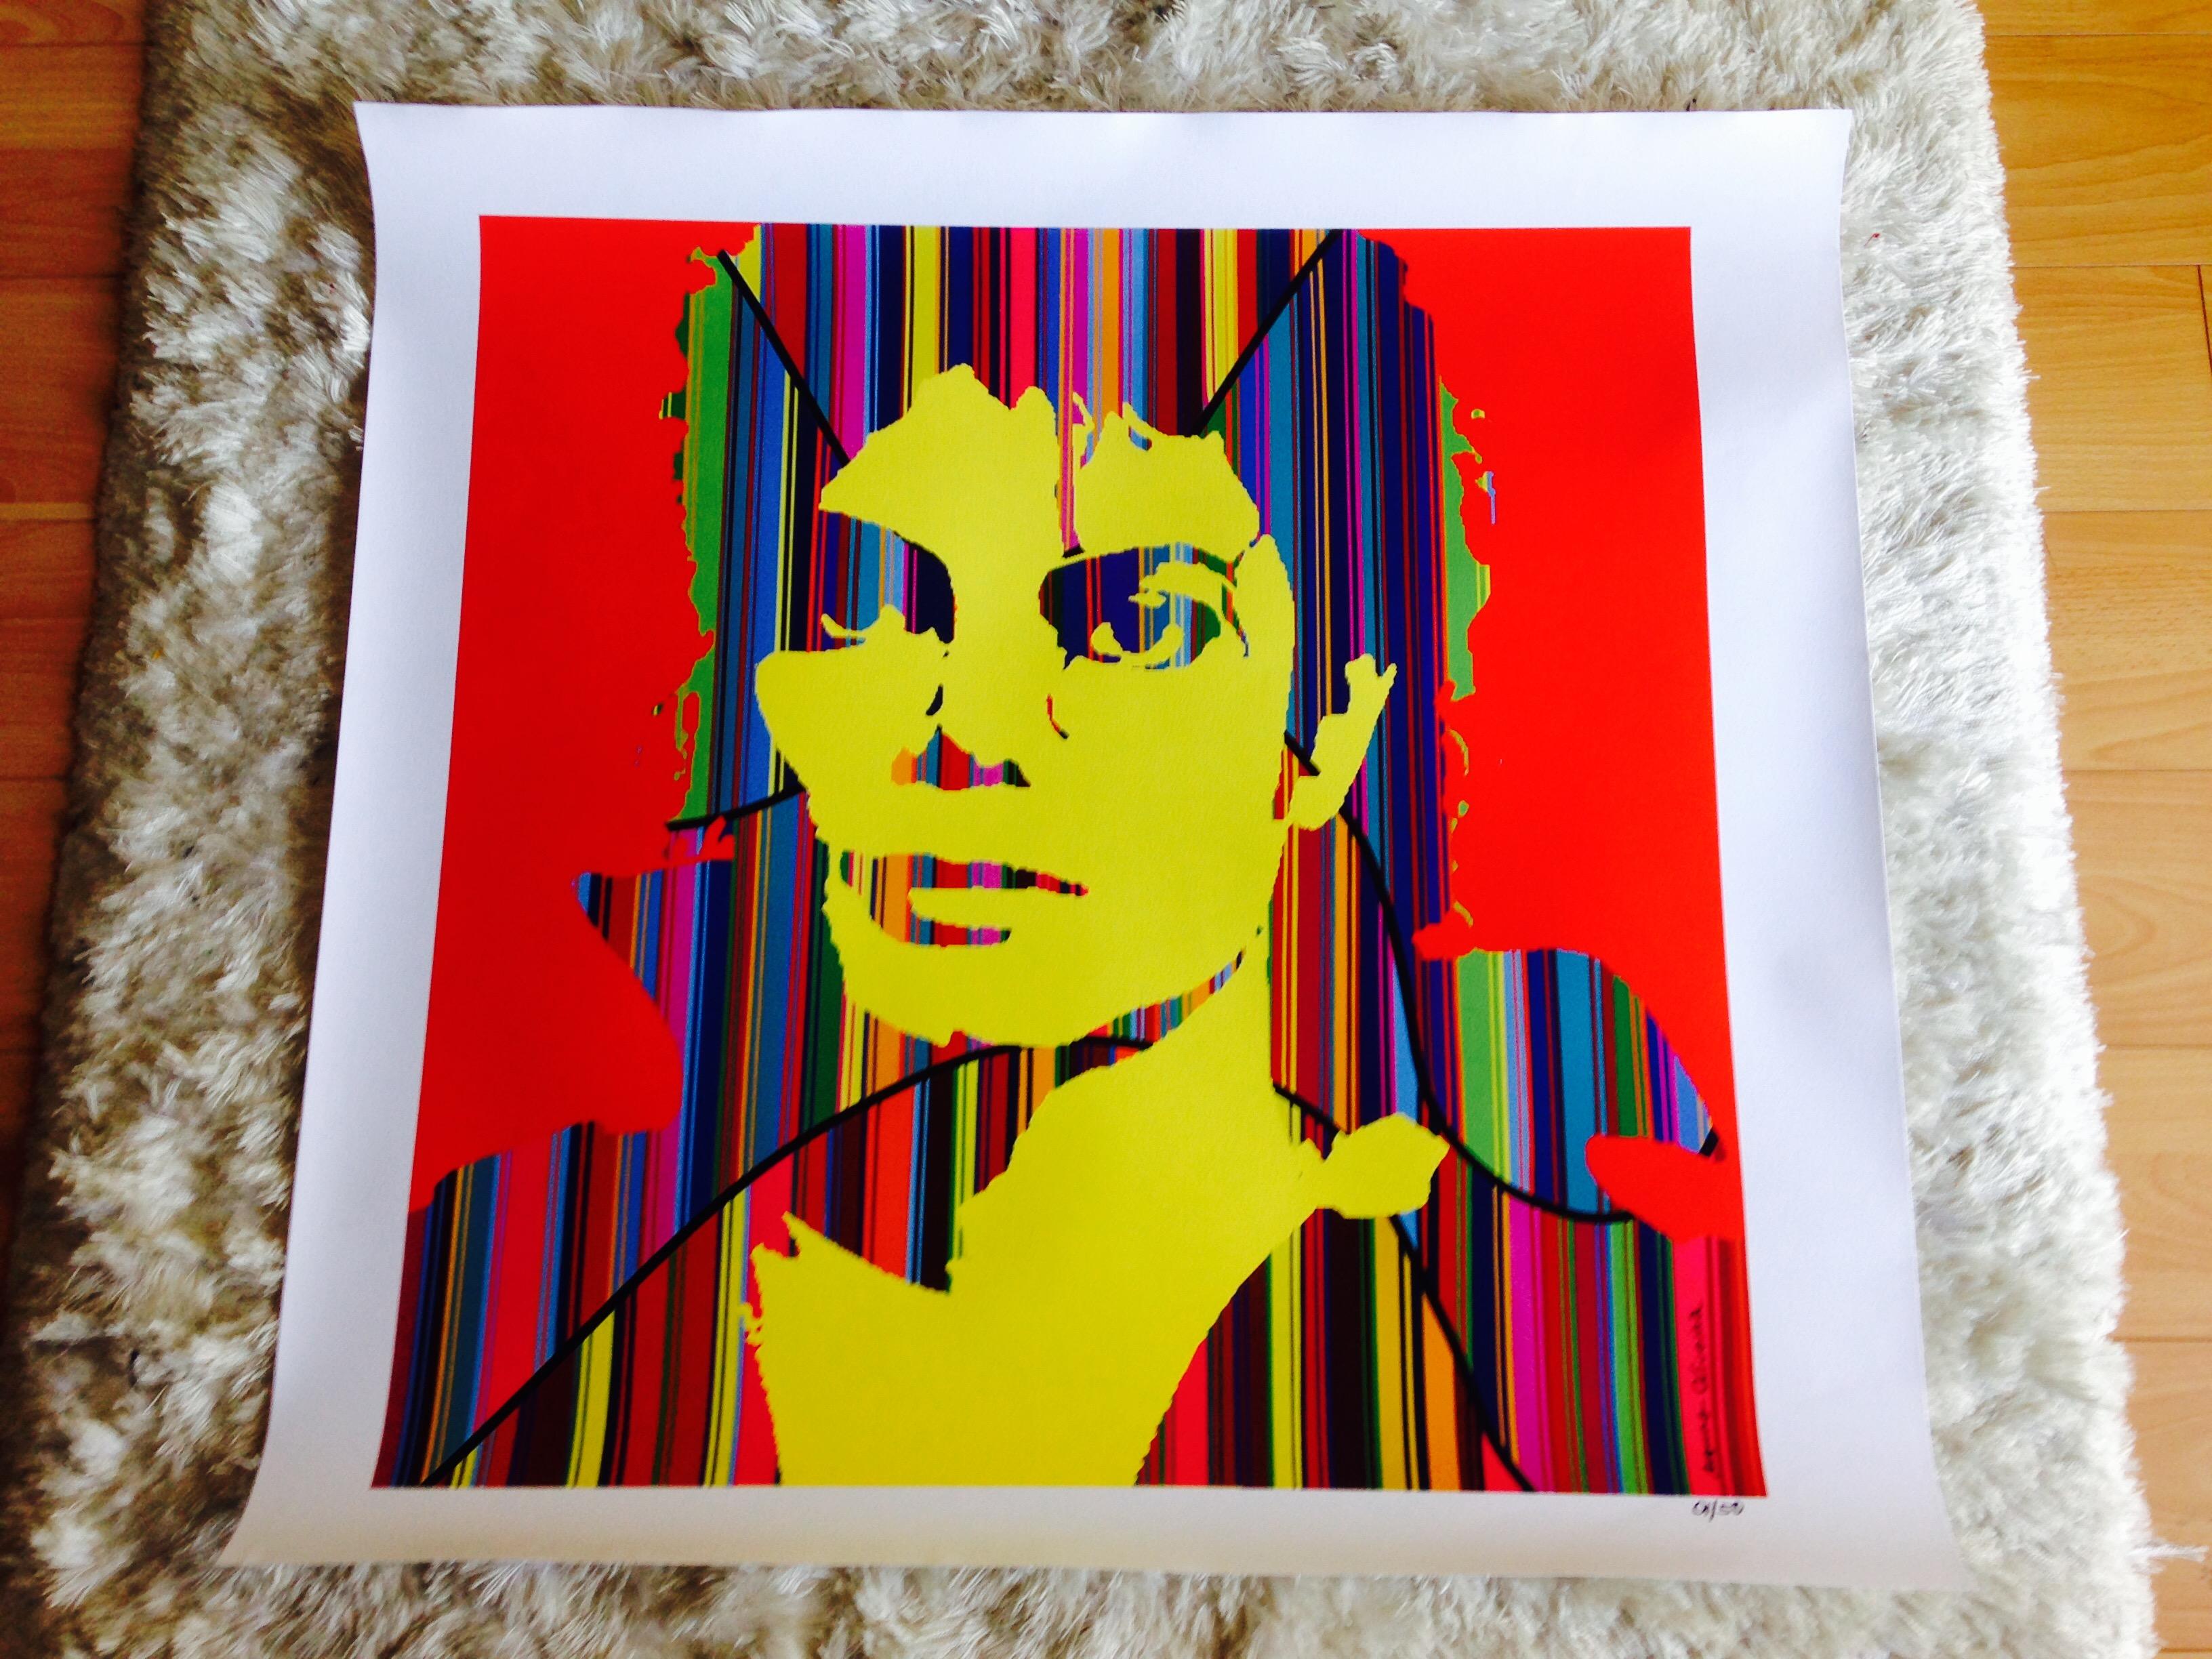 Celebrating the King of Pop Michael Jackson by Mauro Oliveira. The colorful pinstripes represent the music and the happiness the King of Pop brought to the world.

Limited edition of 30 museum quality Giclee prints on PAPER, signed and numbered by